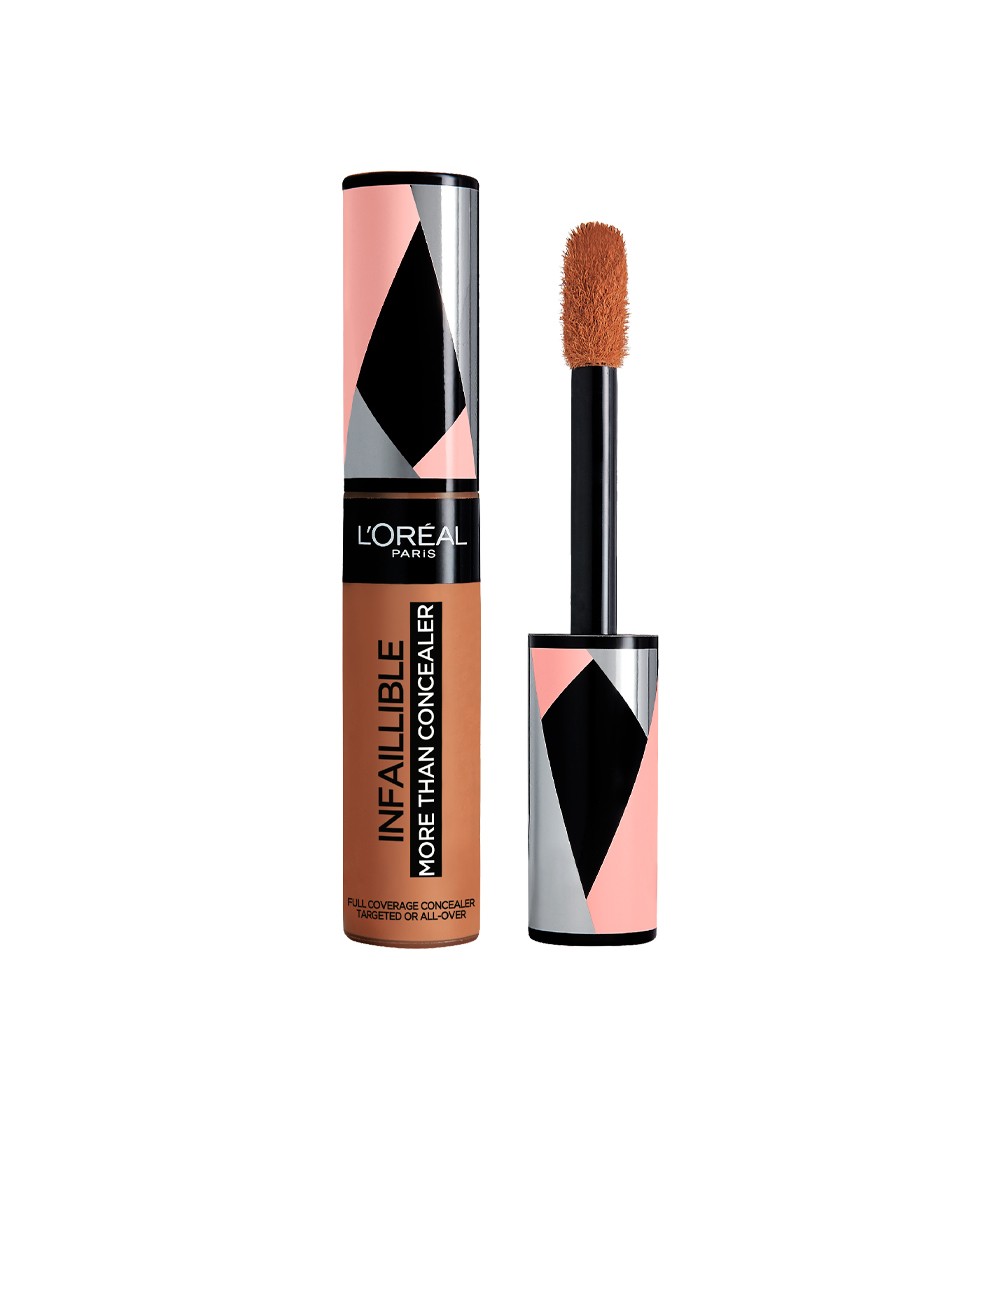 INFALLIBLE more than a concealer full coverage 338